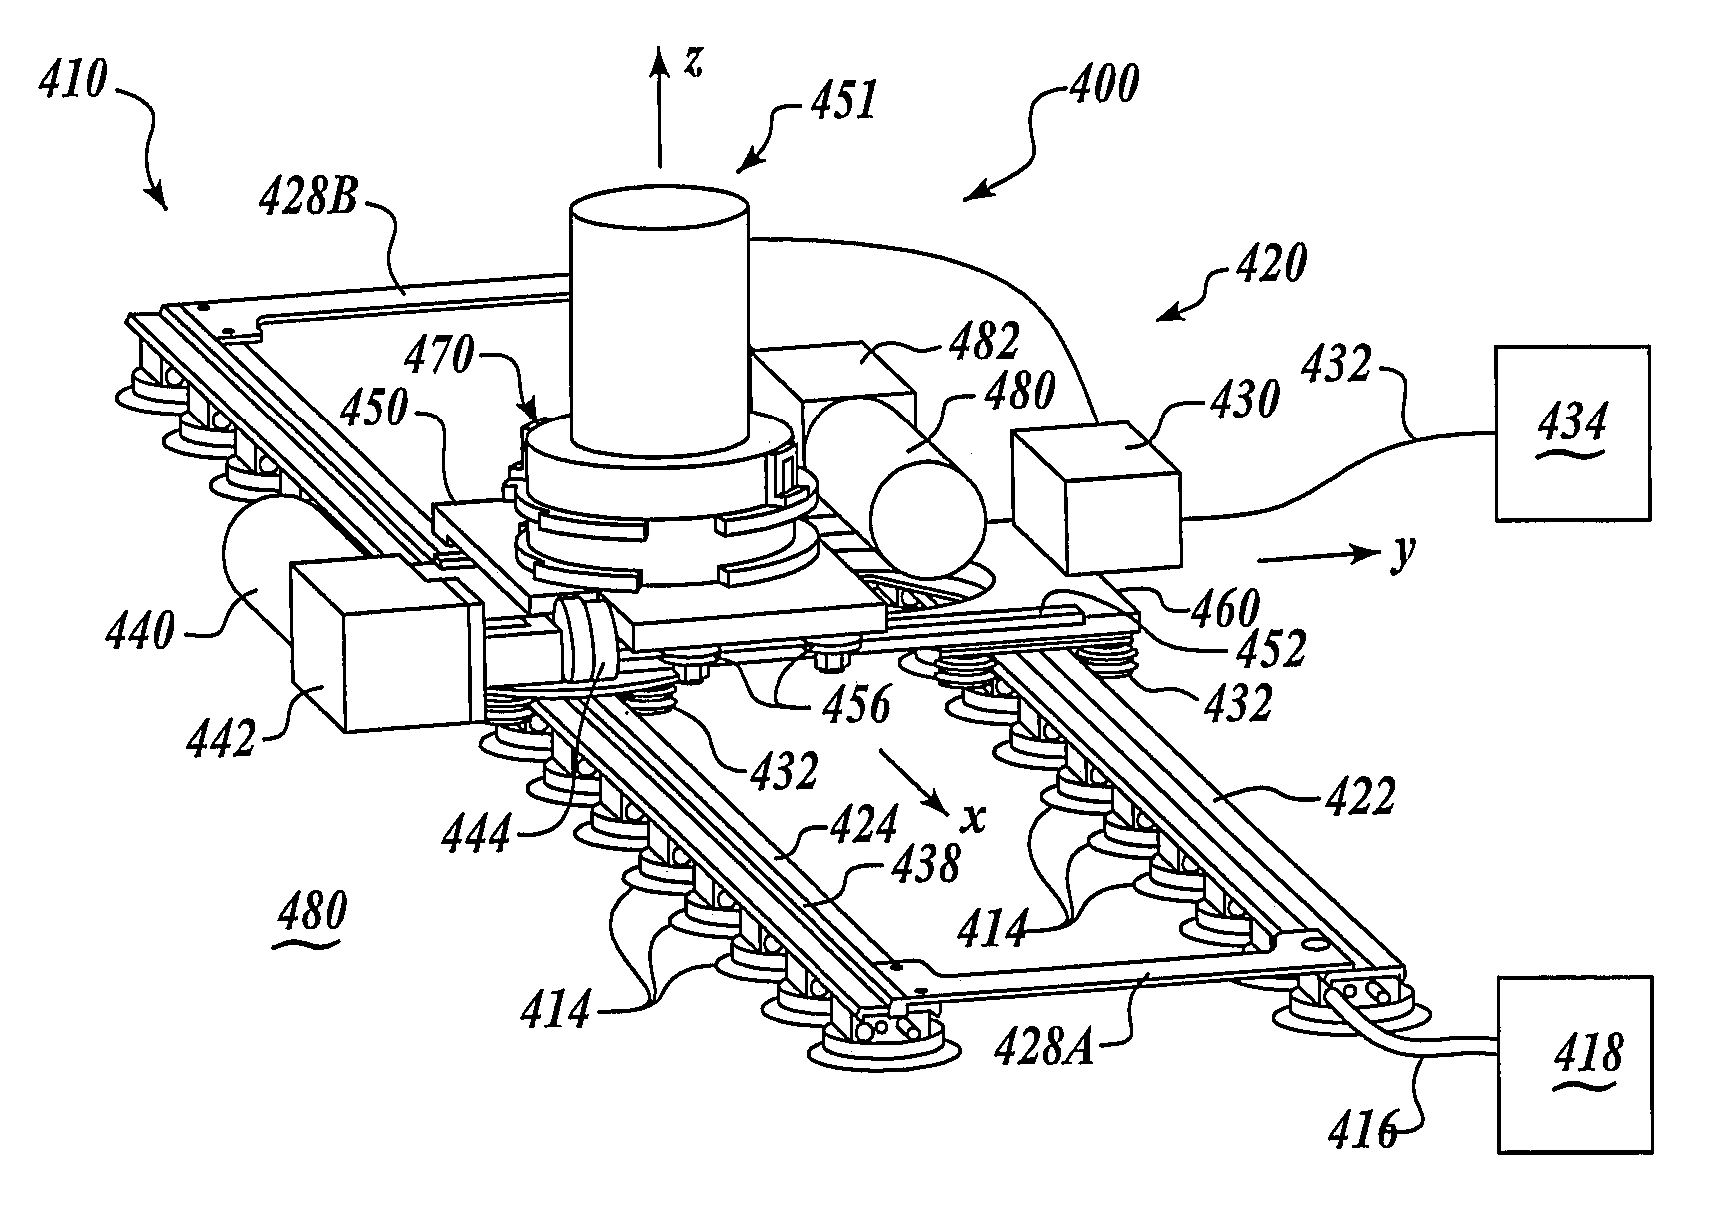 Apparatus and methods for manufacturing operations